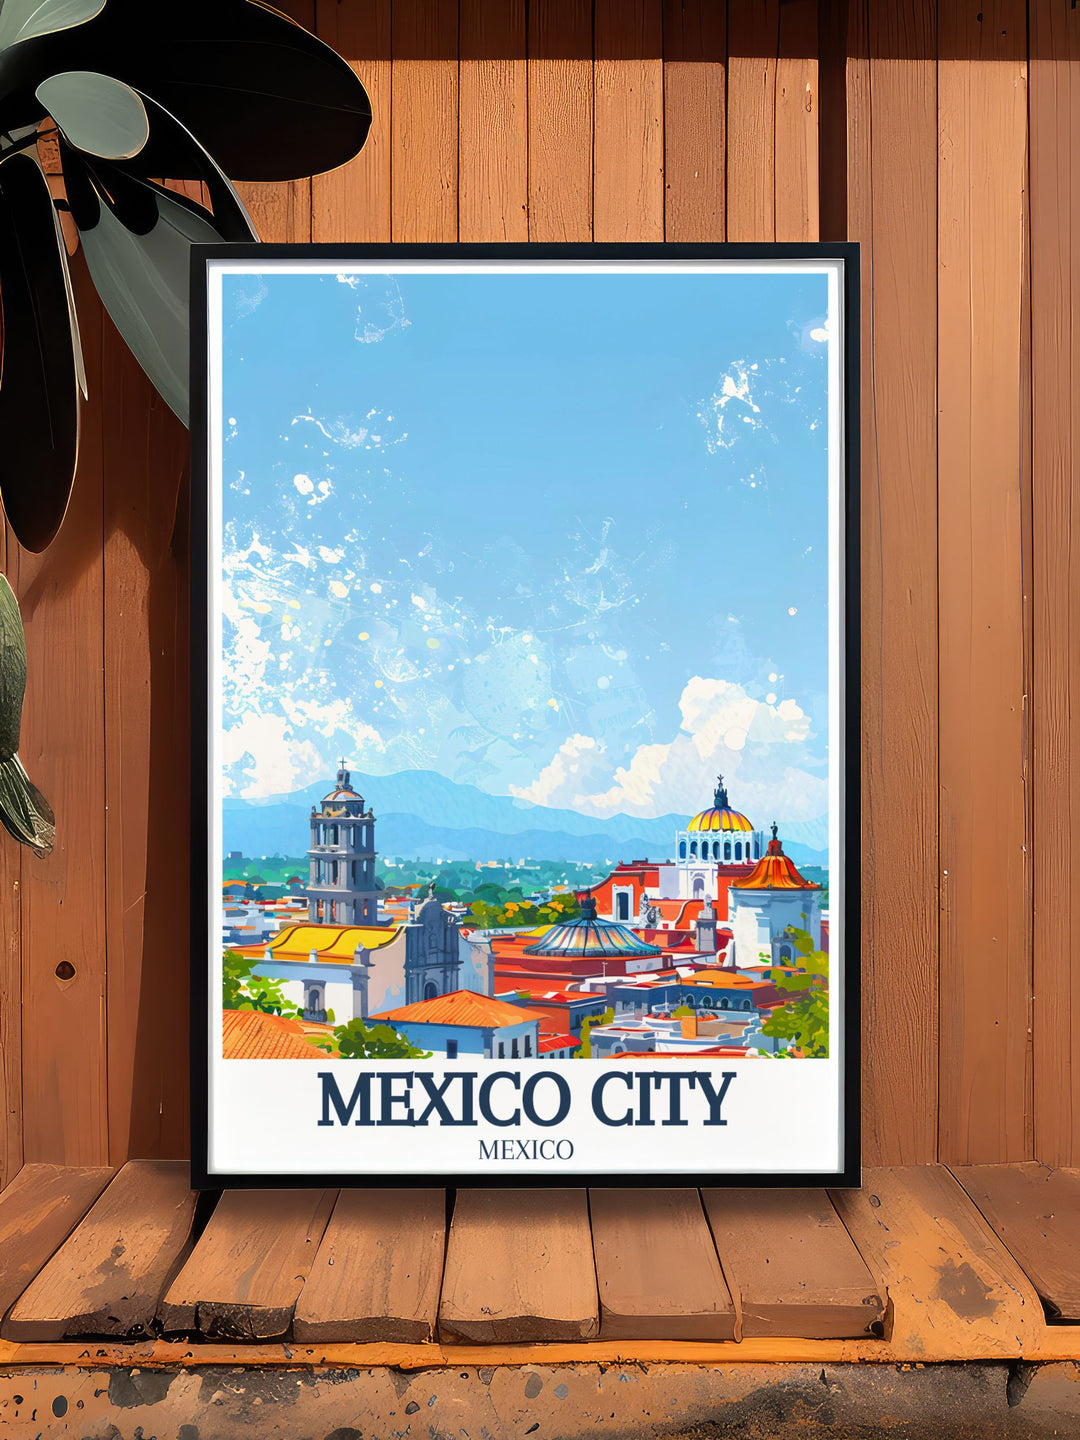 Metropolitan cathedral Zocalo Chapultepec castle travel poster brings the heart of Mexico City to your home. This vibrant artwork captures the lively energy and historical beauty of these famous landmarks perfect for decor and gifts.